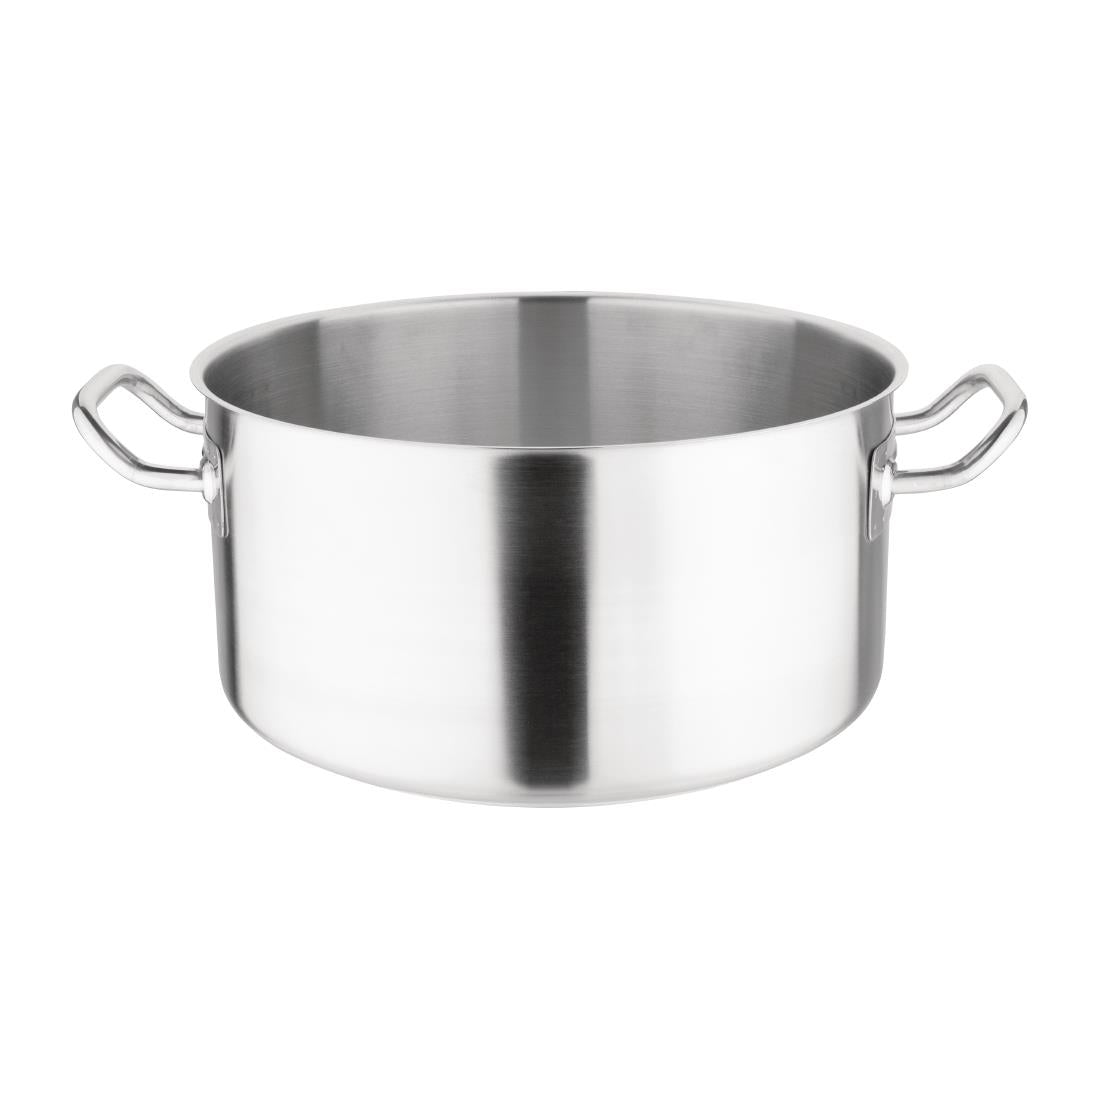 M942 Vogue Stainless Steel Stew pan 12.5Ltr